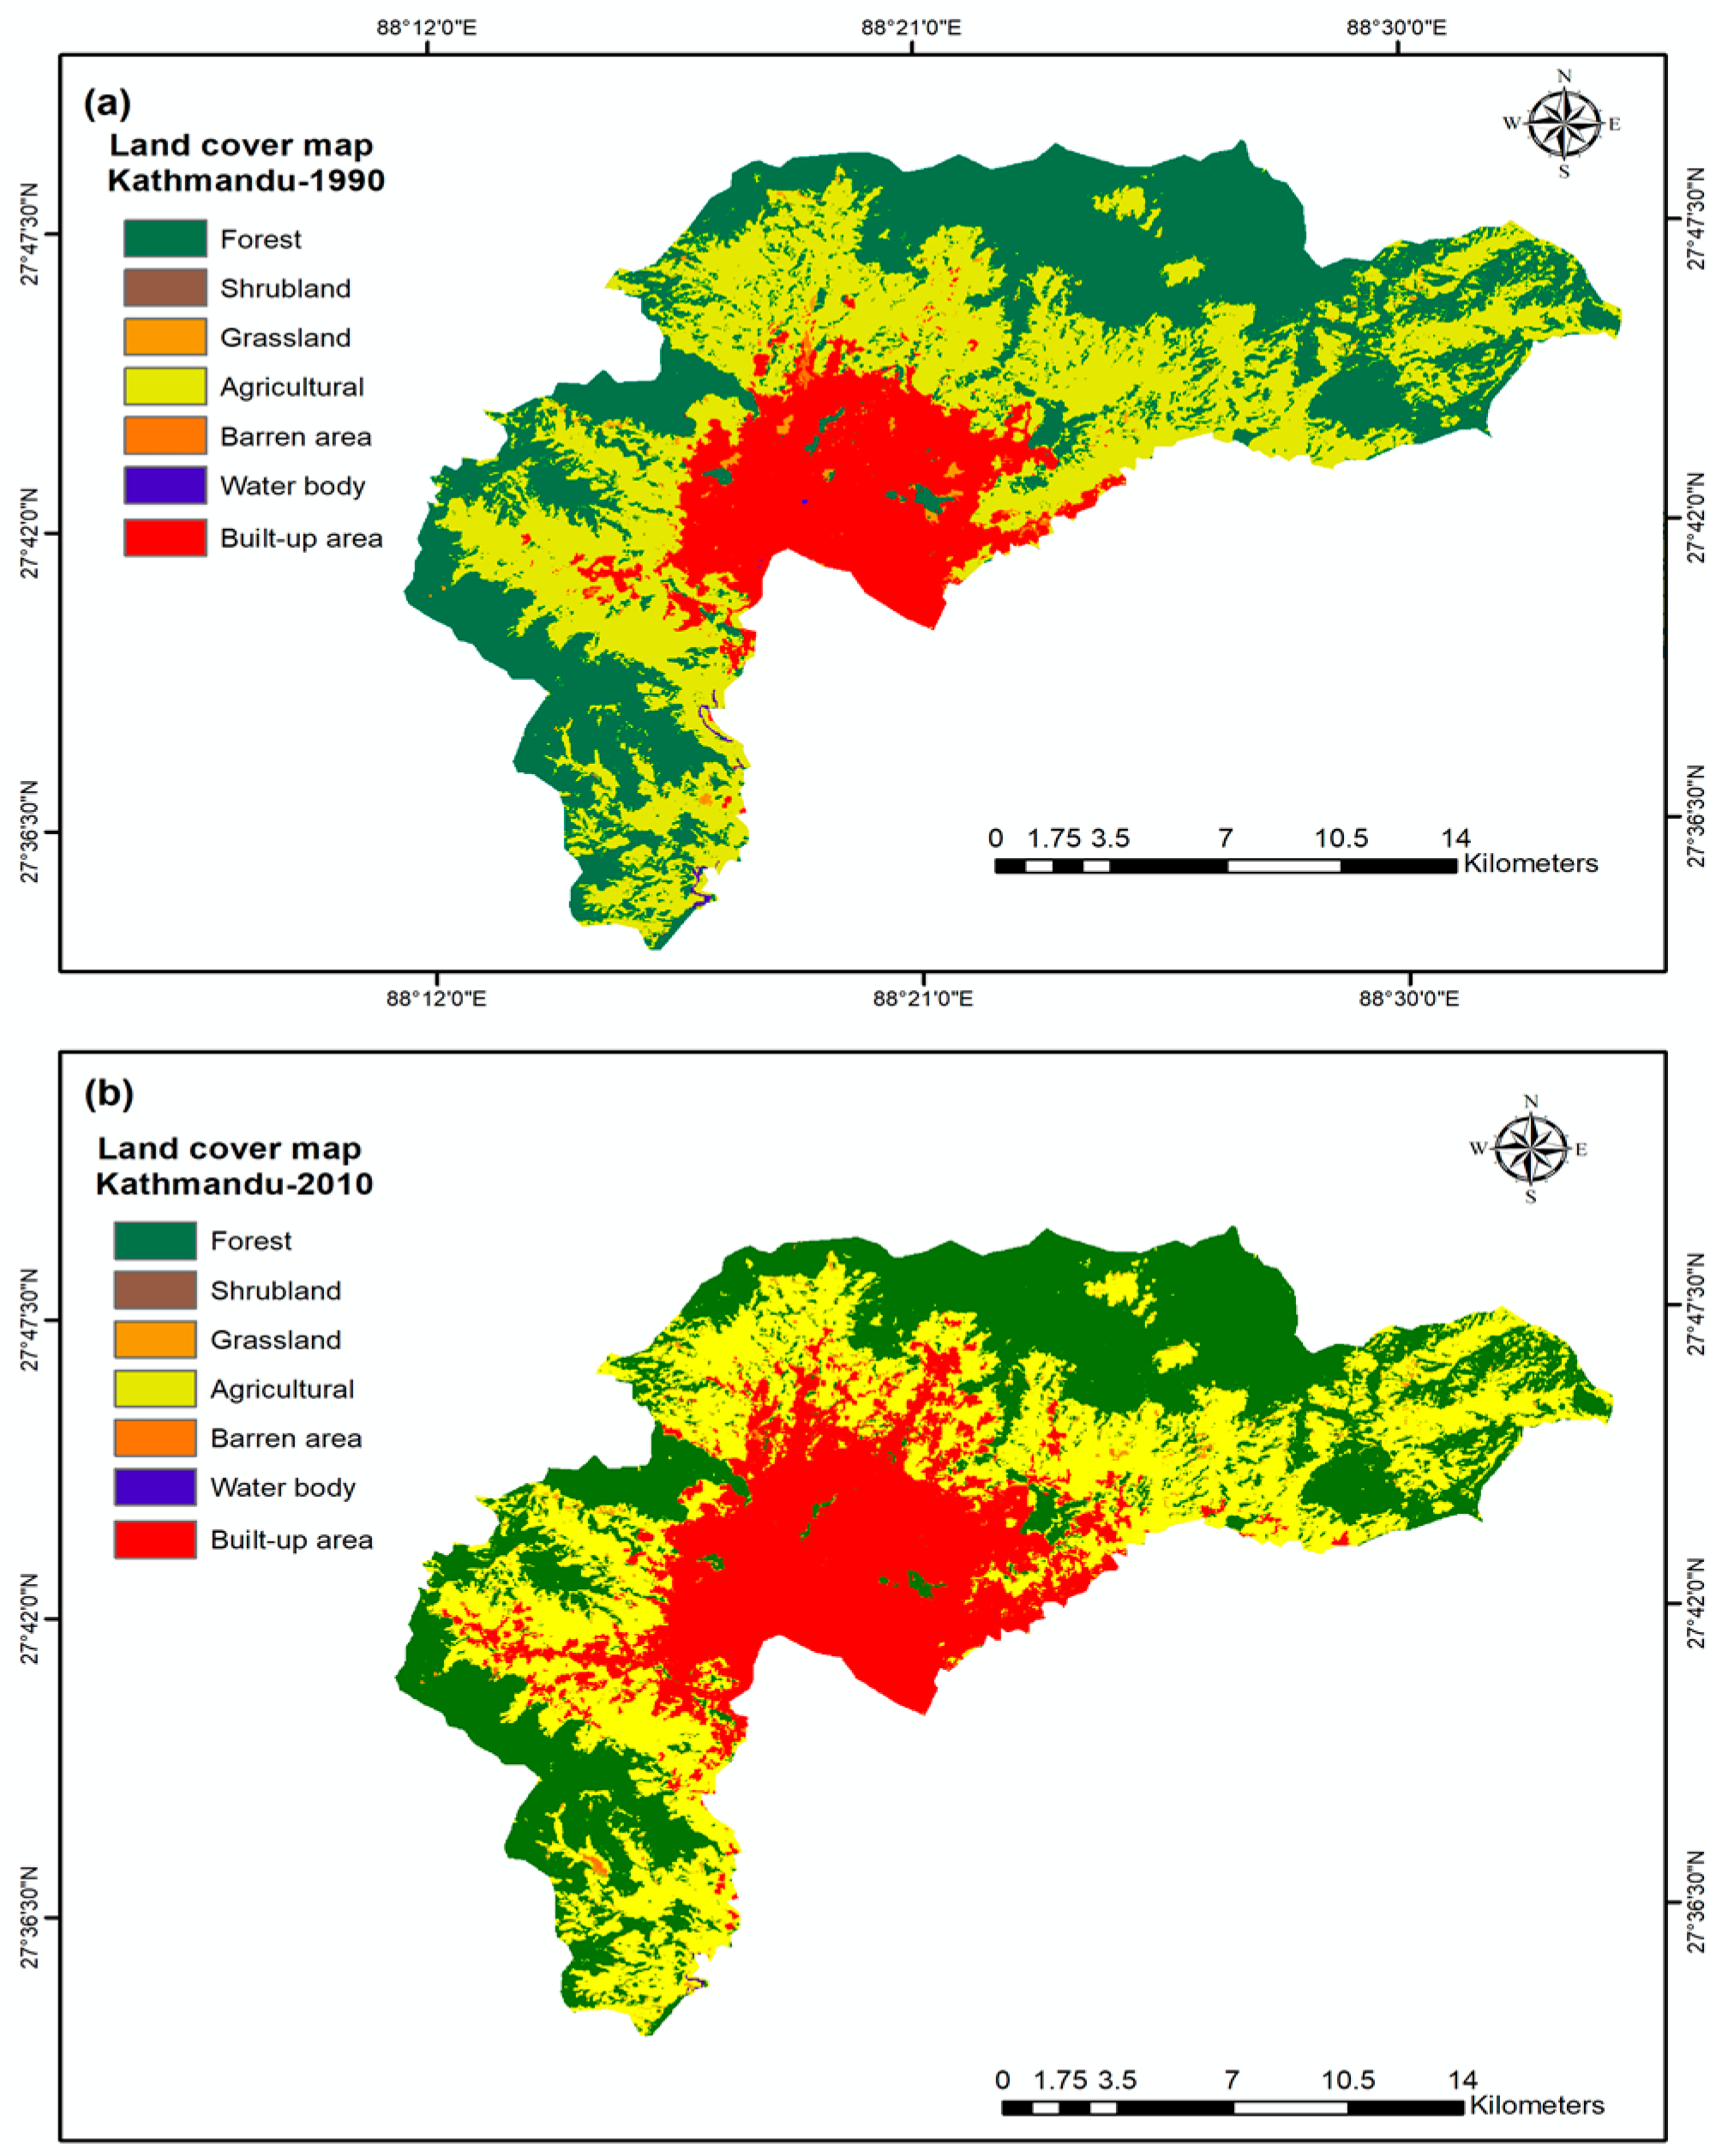 Land use and land cover change (LULC) change map of the Kathmandu district in 1990 (a) and 2010 (b)